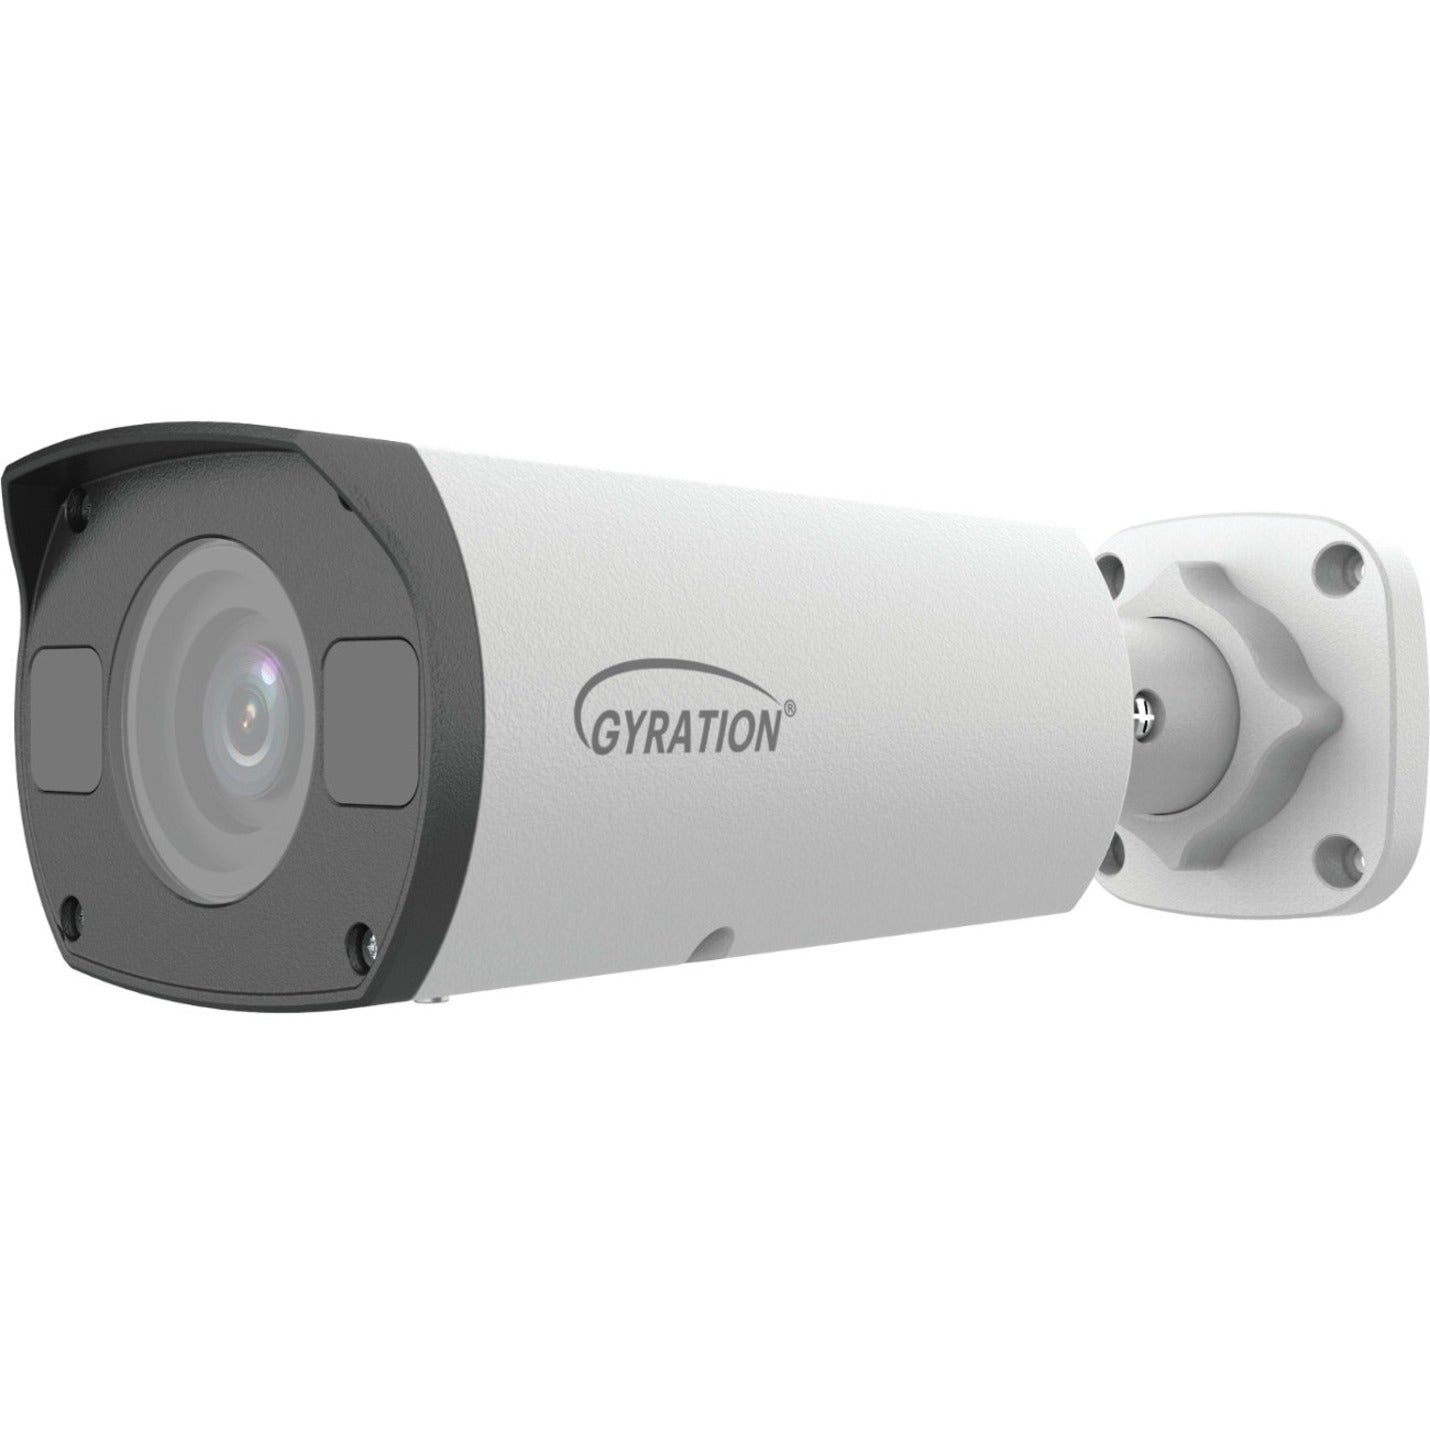 Gyration CYBERVIEW 411B-TAA 4 MP Outdoor Intelligent Varifocal Bullet Camera, 5x Optical Zoom, 2688 x 1520 Resolution, SD Card Storage